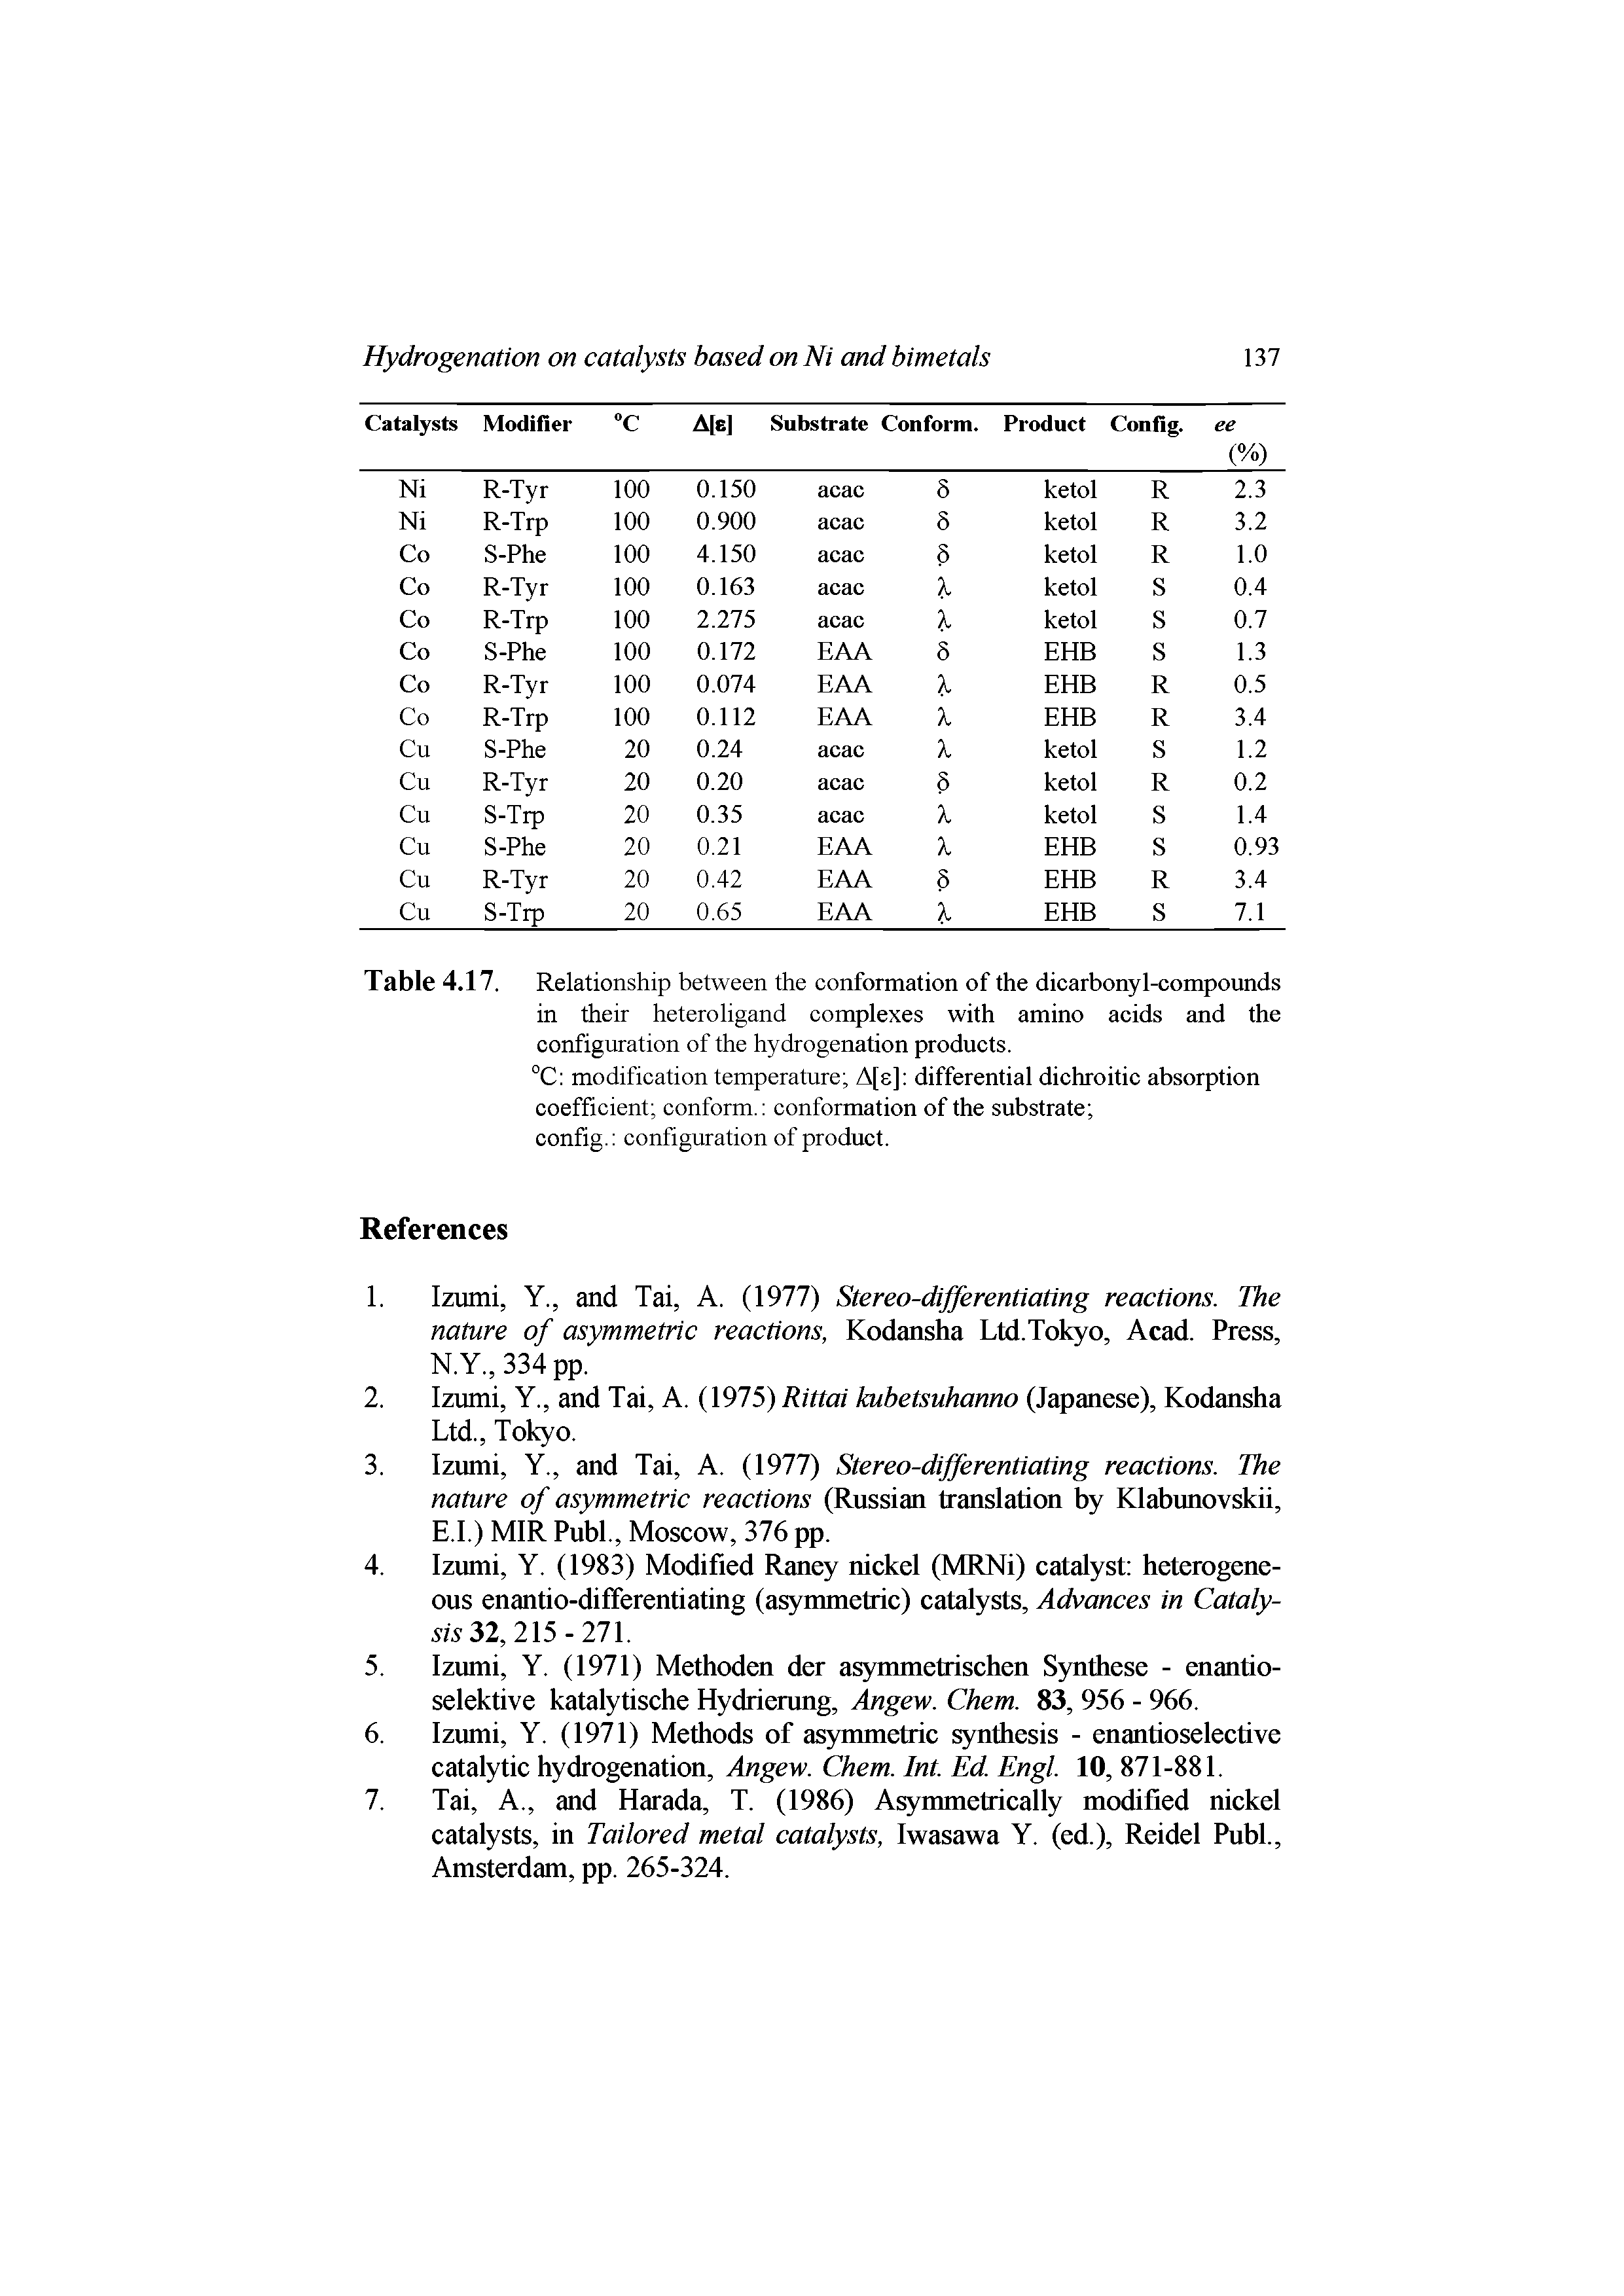 Table 4.17. Relationship between the conformation of the dicarbonyl-compounds in their heteroligand complexes with amino acids and the configuration of the hydrogenation products.